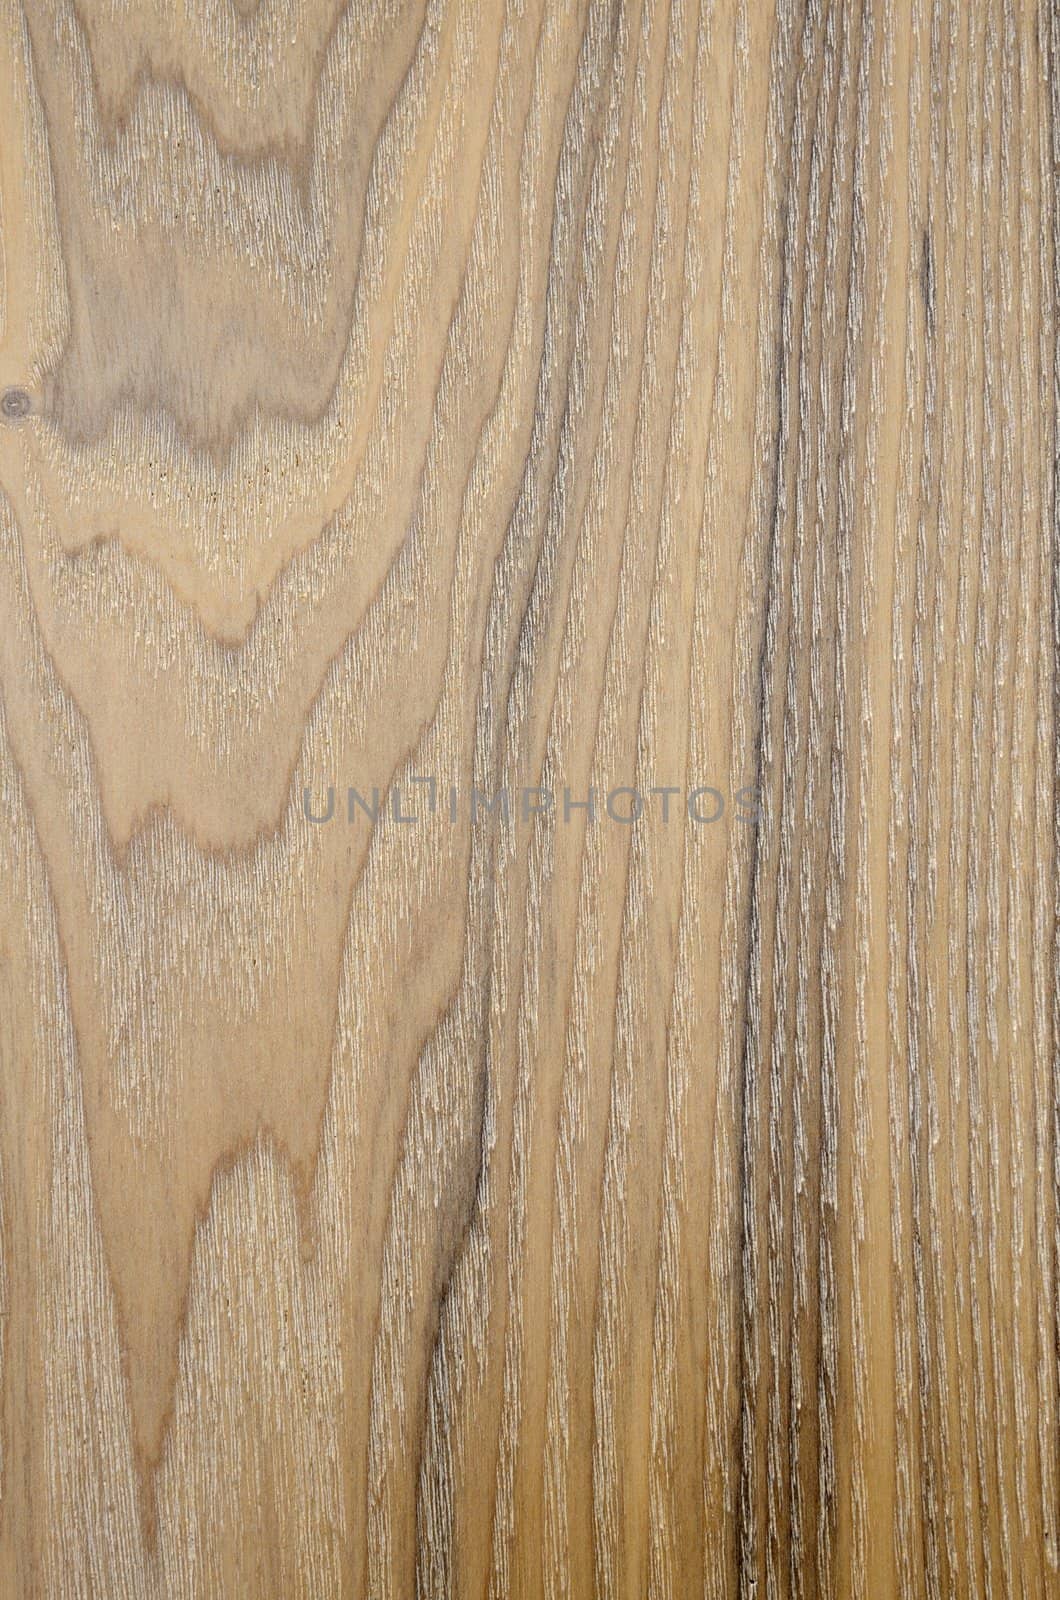 Texture of plank wood wall for background